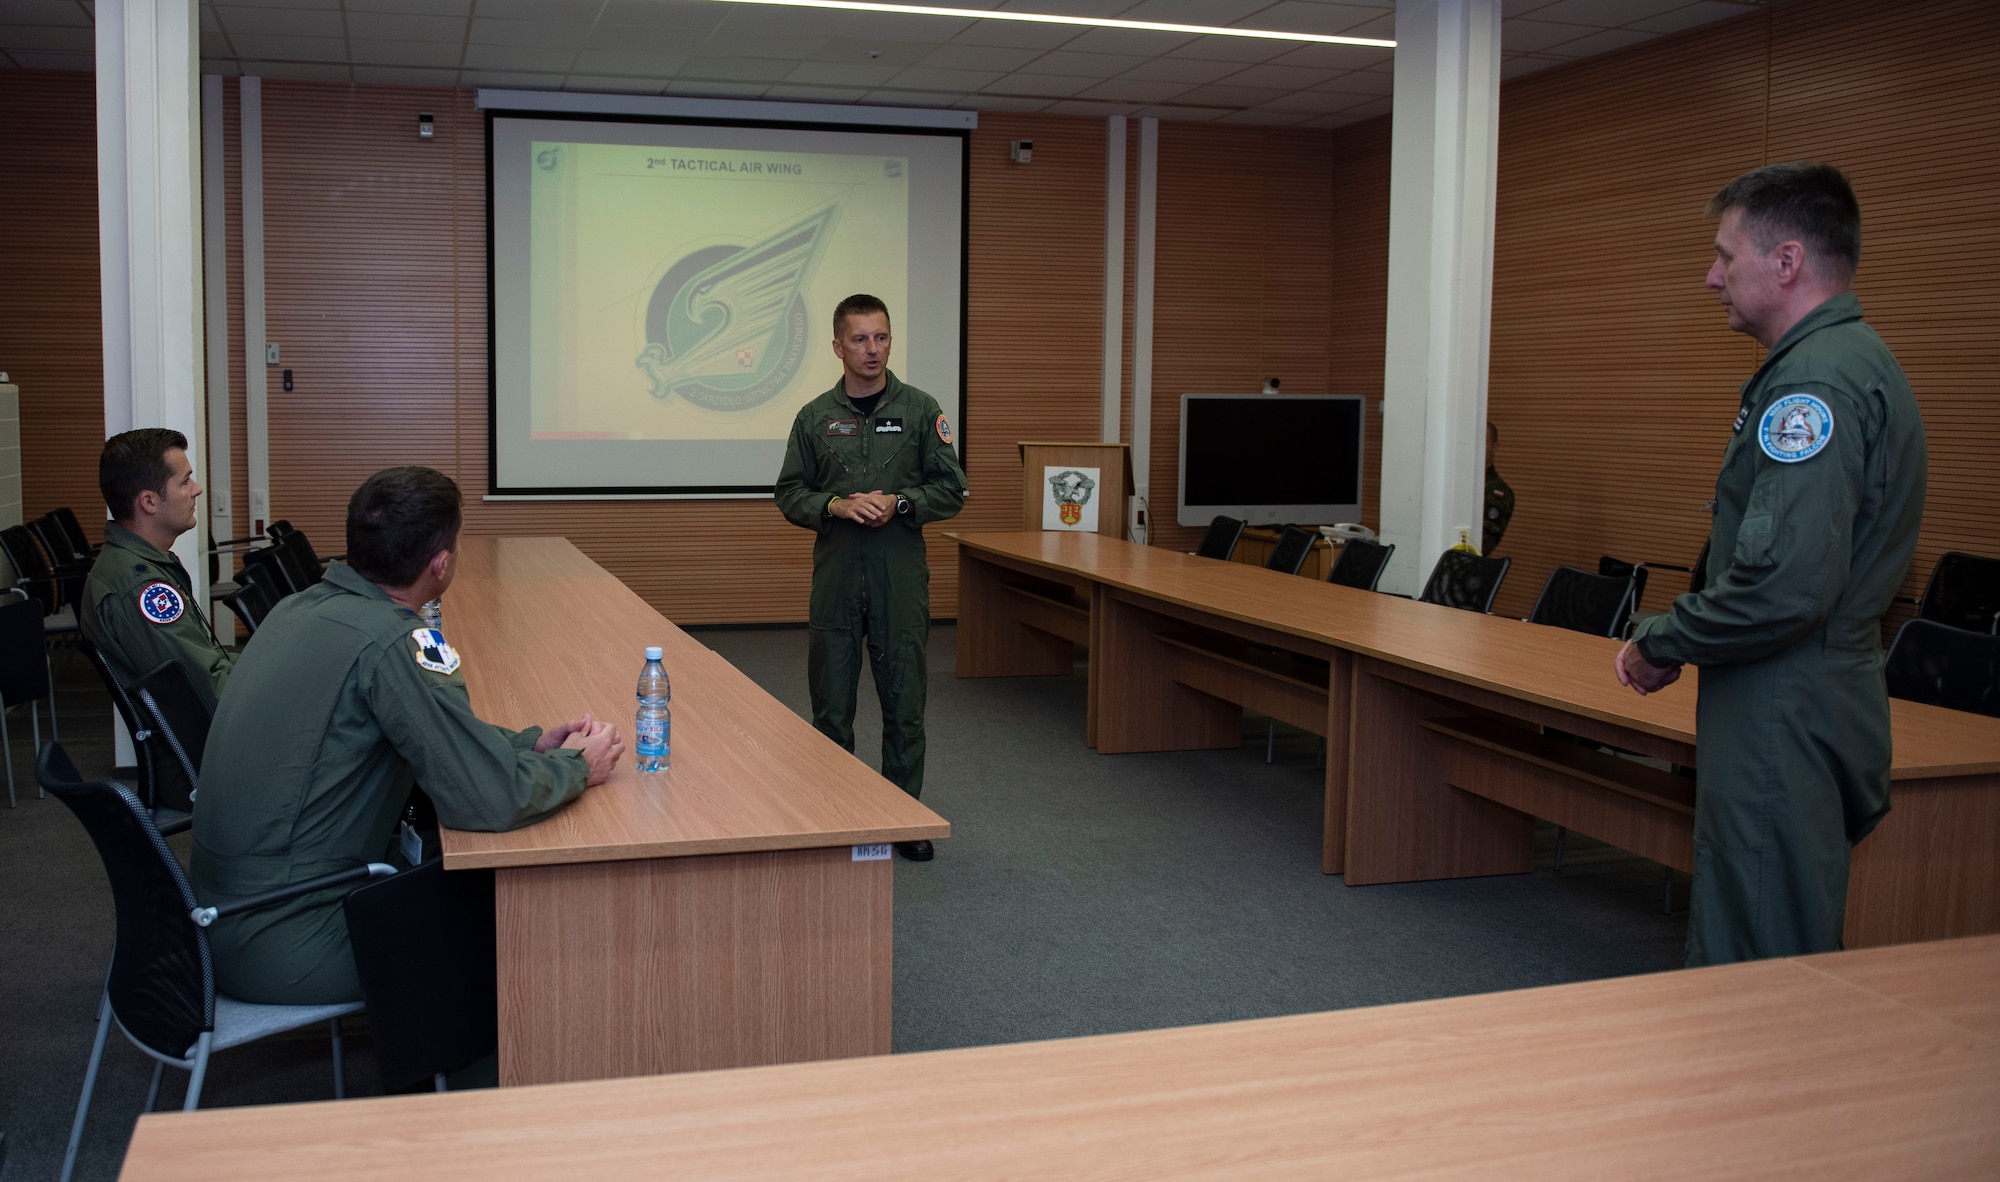 U.S. Air Force Col. David Epperson, left, 52nd Fighter Wing commander, and Lt. Col. Albert Roper, far left, 52nd Operations Group Detachment One commander, get a briefing by Polish Air Force Brig. Gen. Iteneusz Nowak, center, 2nd Tactical Air Wing commander, and Col. Tomasz Jatczak, right, 32nd Tactical Air Base commander, at Łask AB, Poland, August 21, 2020. Nowak and Jatczak discussed the 32nd Tactical AB mission and its capabilities to prepare resources for air operations in the national and allied system, along with providing logistic support for the units within areas of responsibility. (U.S. Air Force photo by Senior Airman Melody W. Howley)